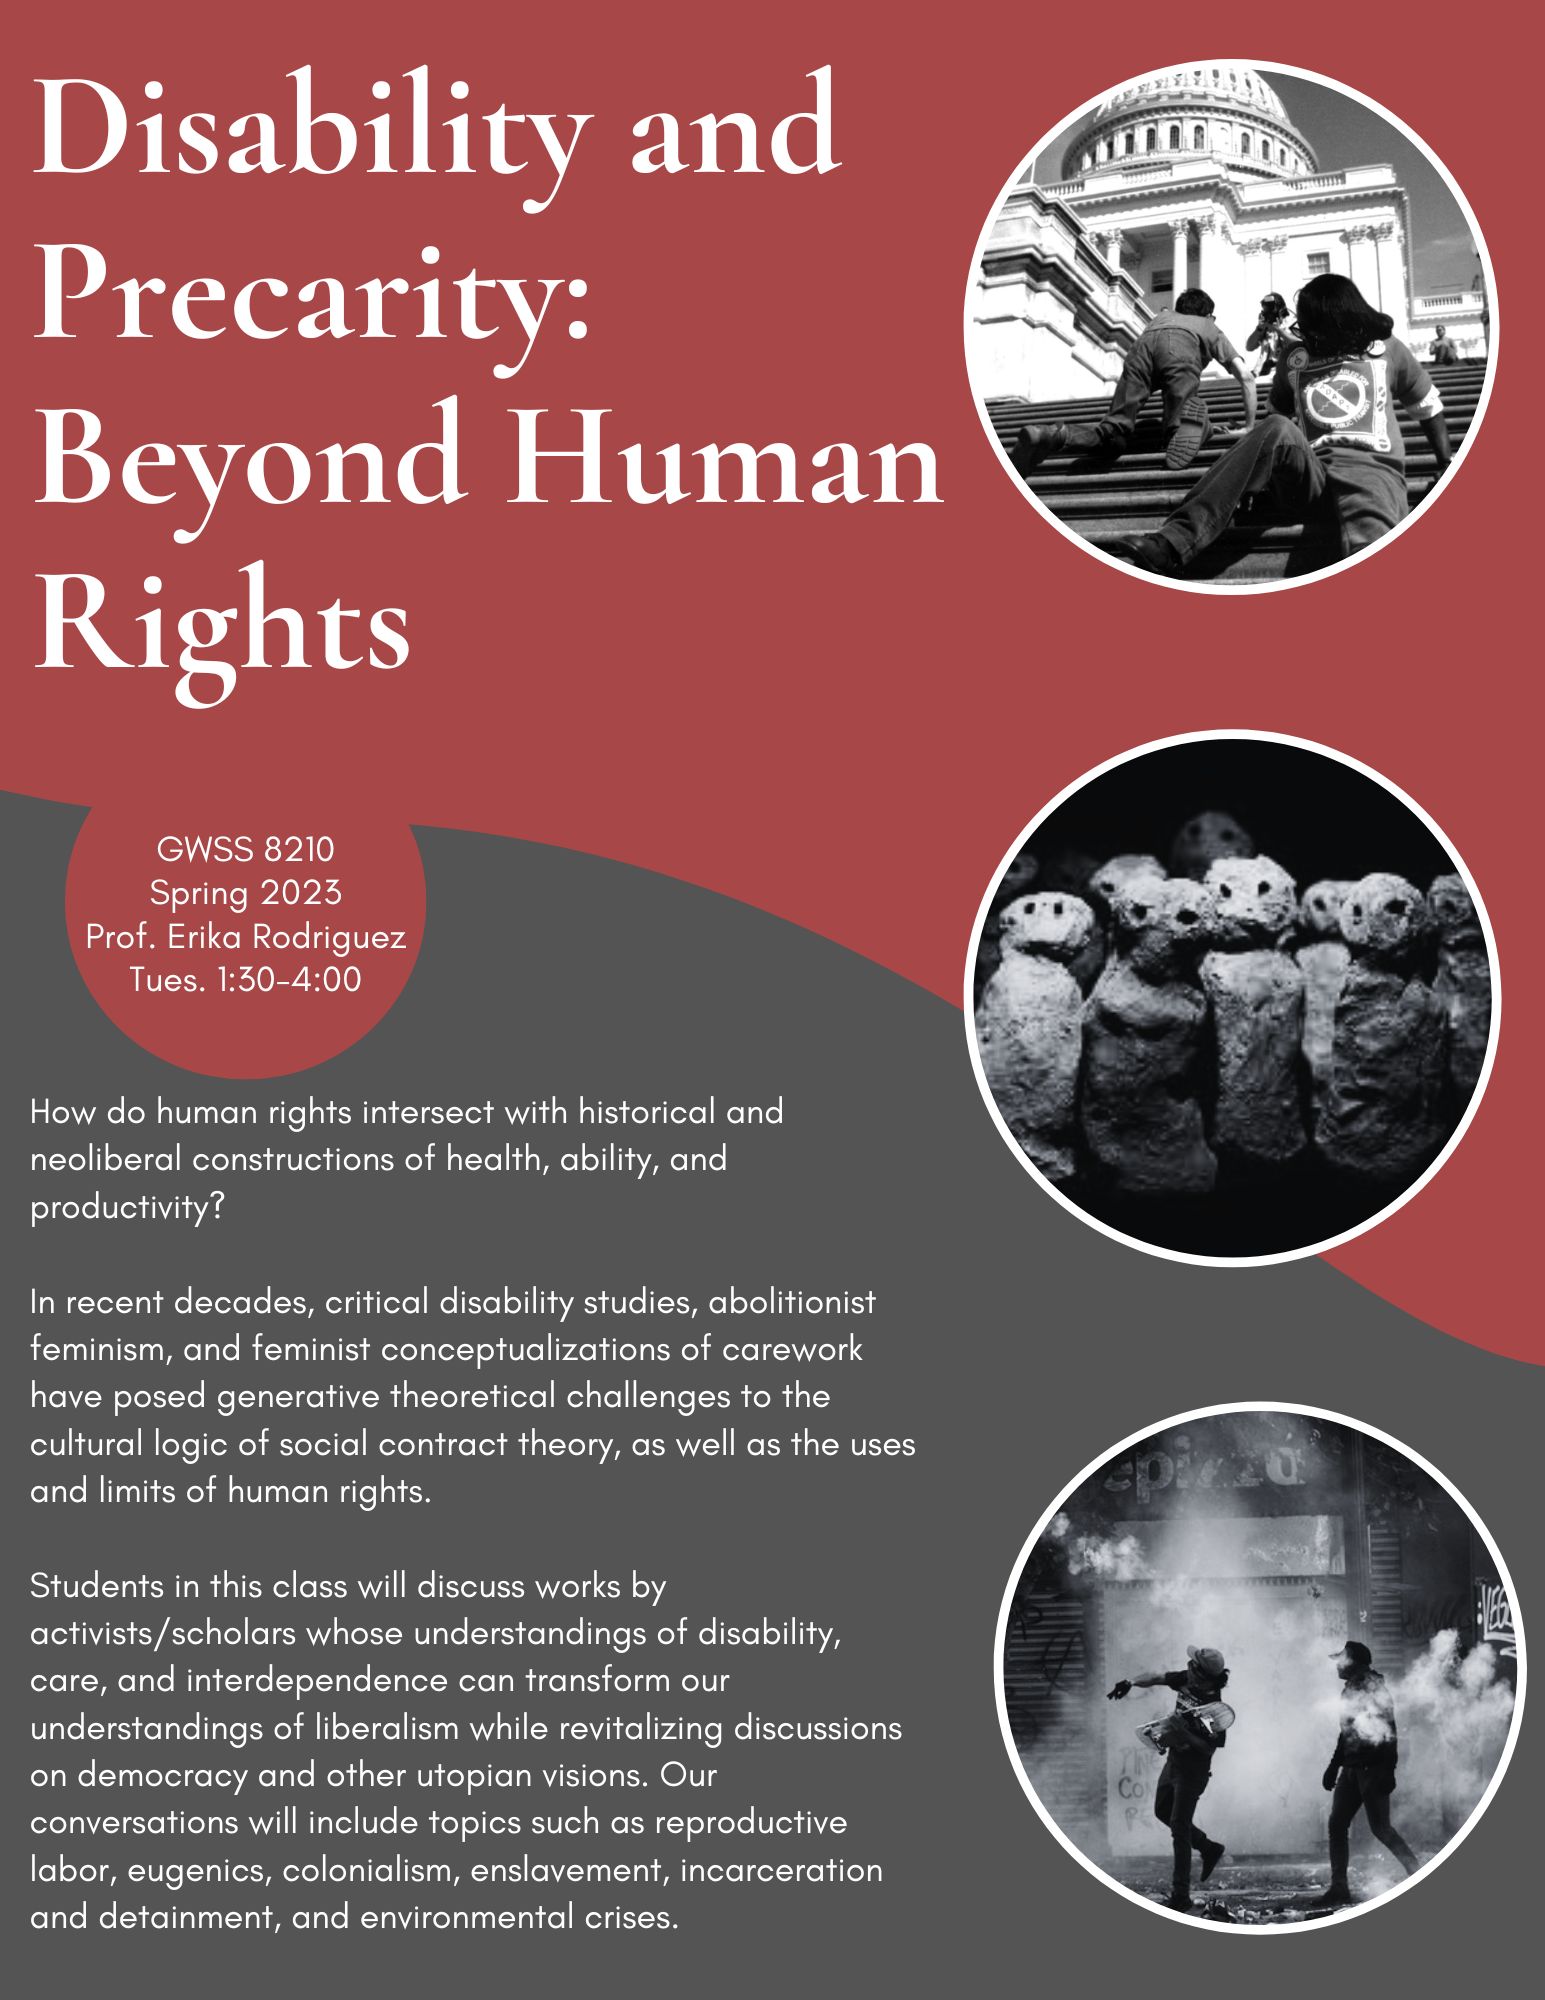 Disability and Precarity: Beyond Human Rights